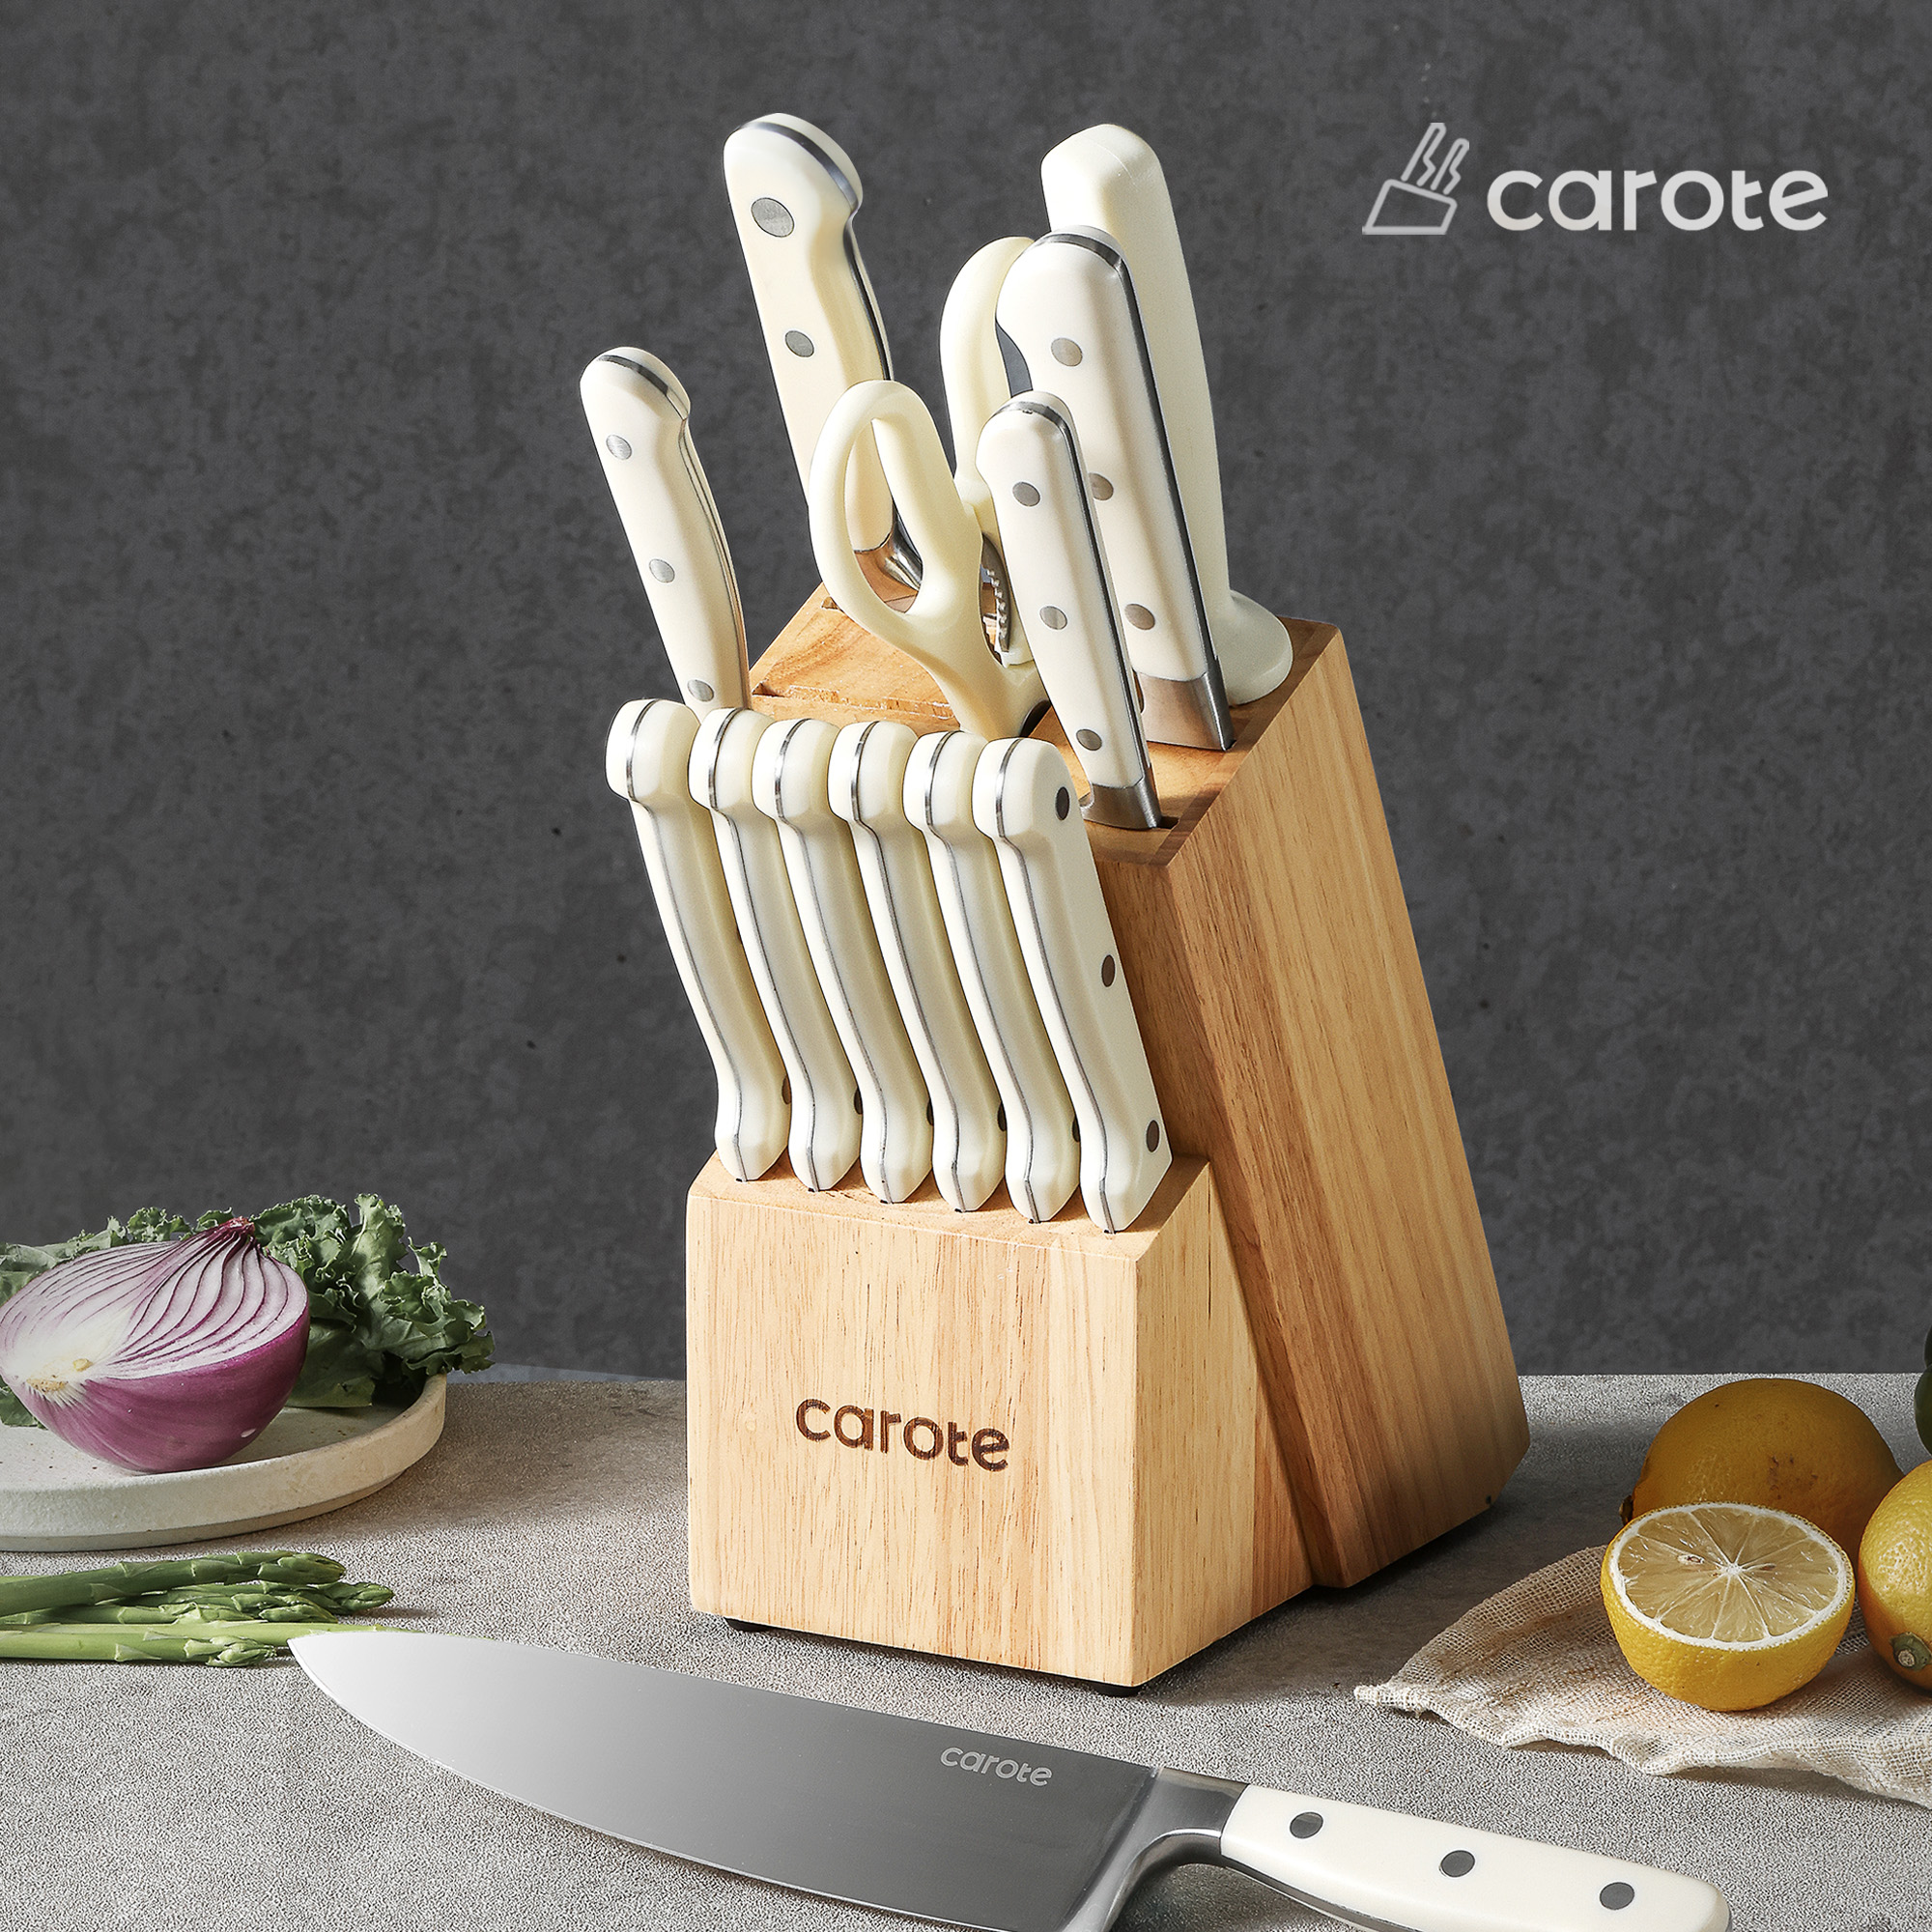 CAROTE 14 Pieces Knife Set with Wooden Block Stainless Steel Knives Dishwasher Safe with Sharp Blade Ergonomic Handle Forged Triple Rivet-Pearl White - image 4 of 6